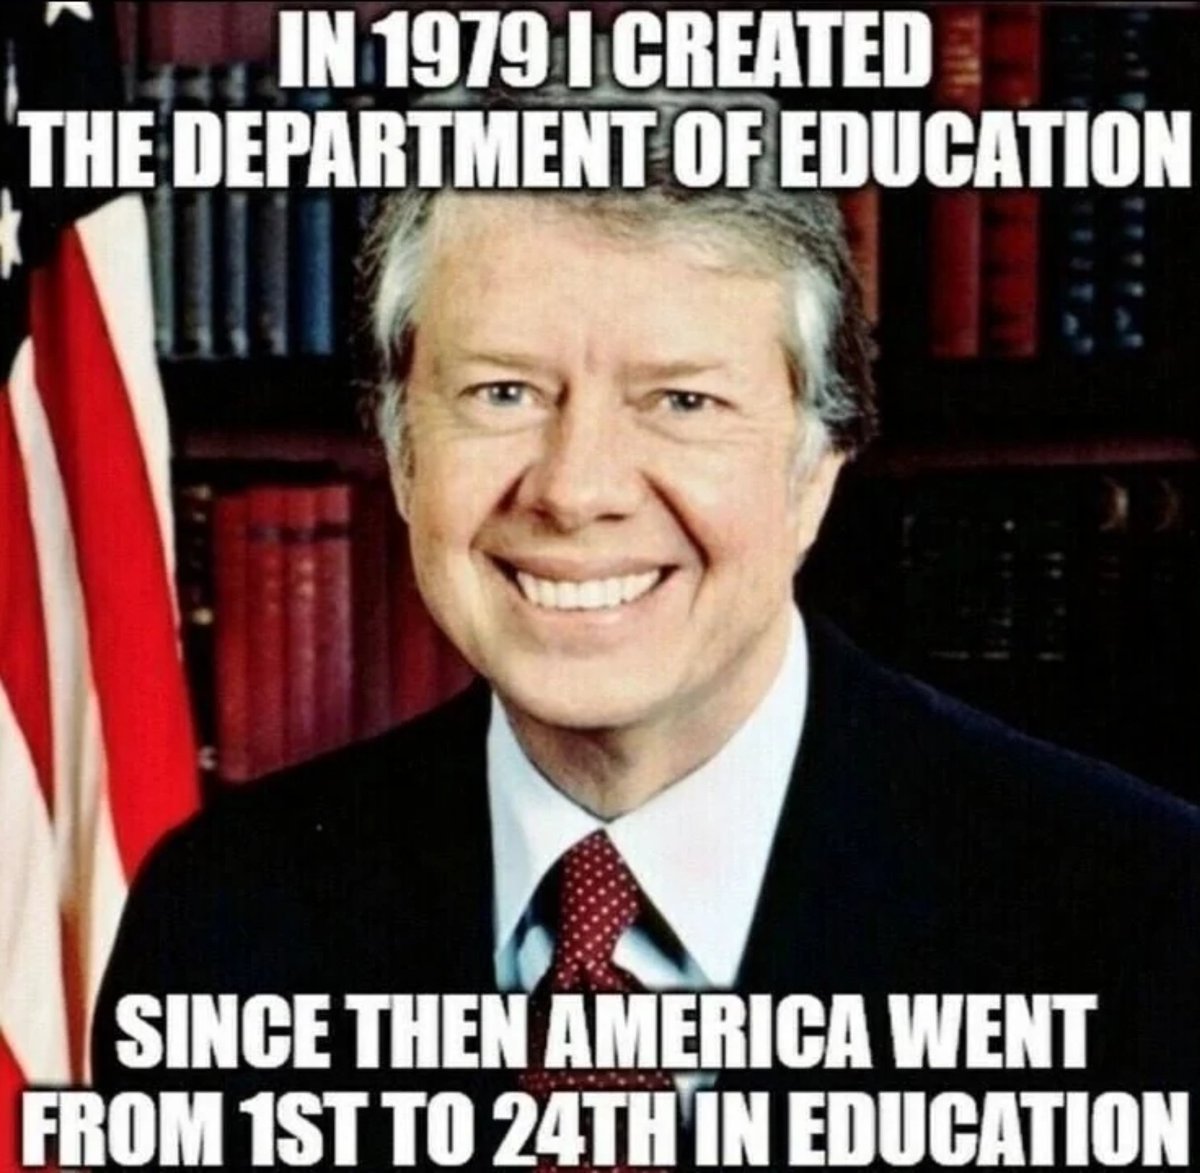 Do you think the Department of Education should be defunded and removed in America? It's pretty telling how it's turning out.